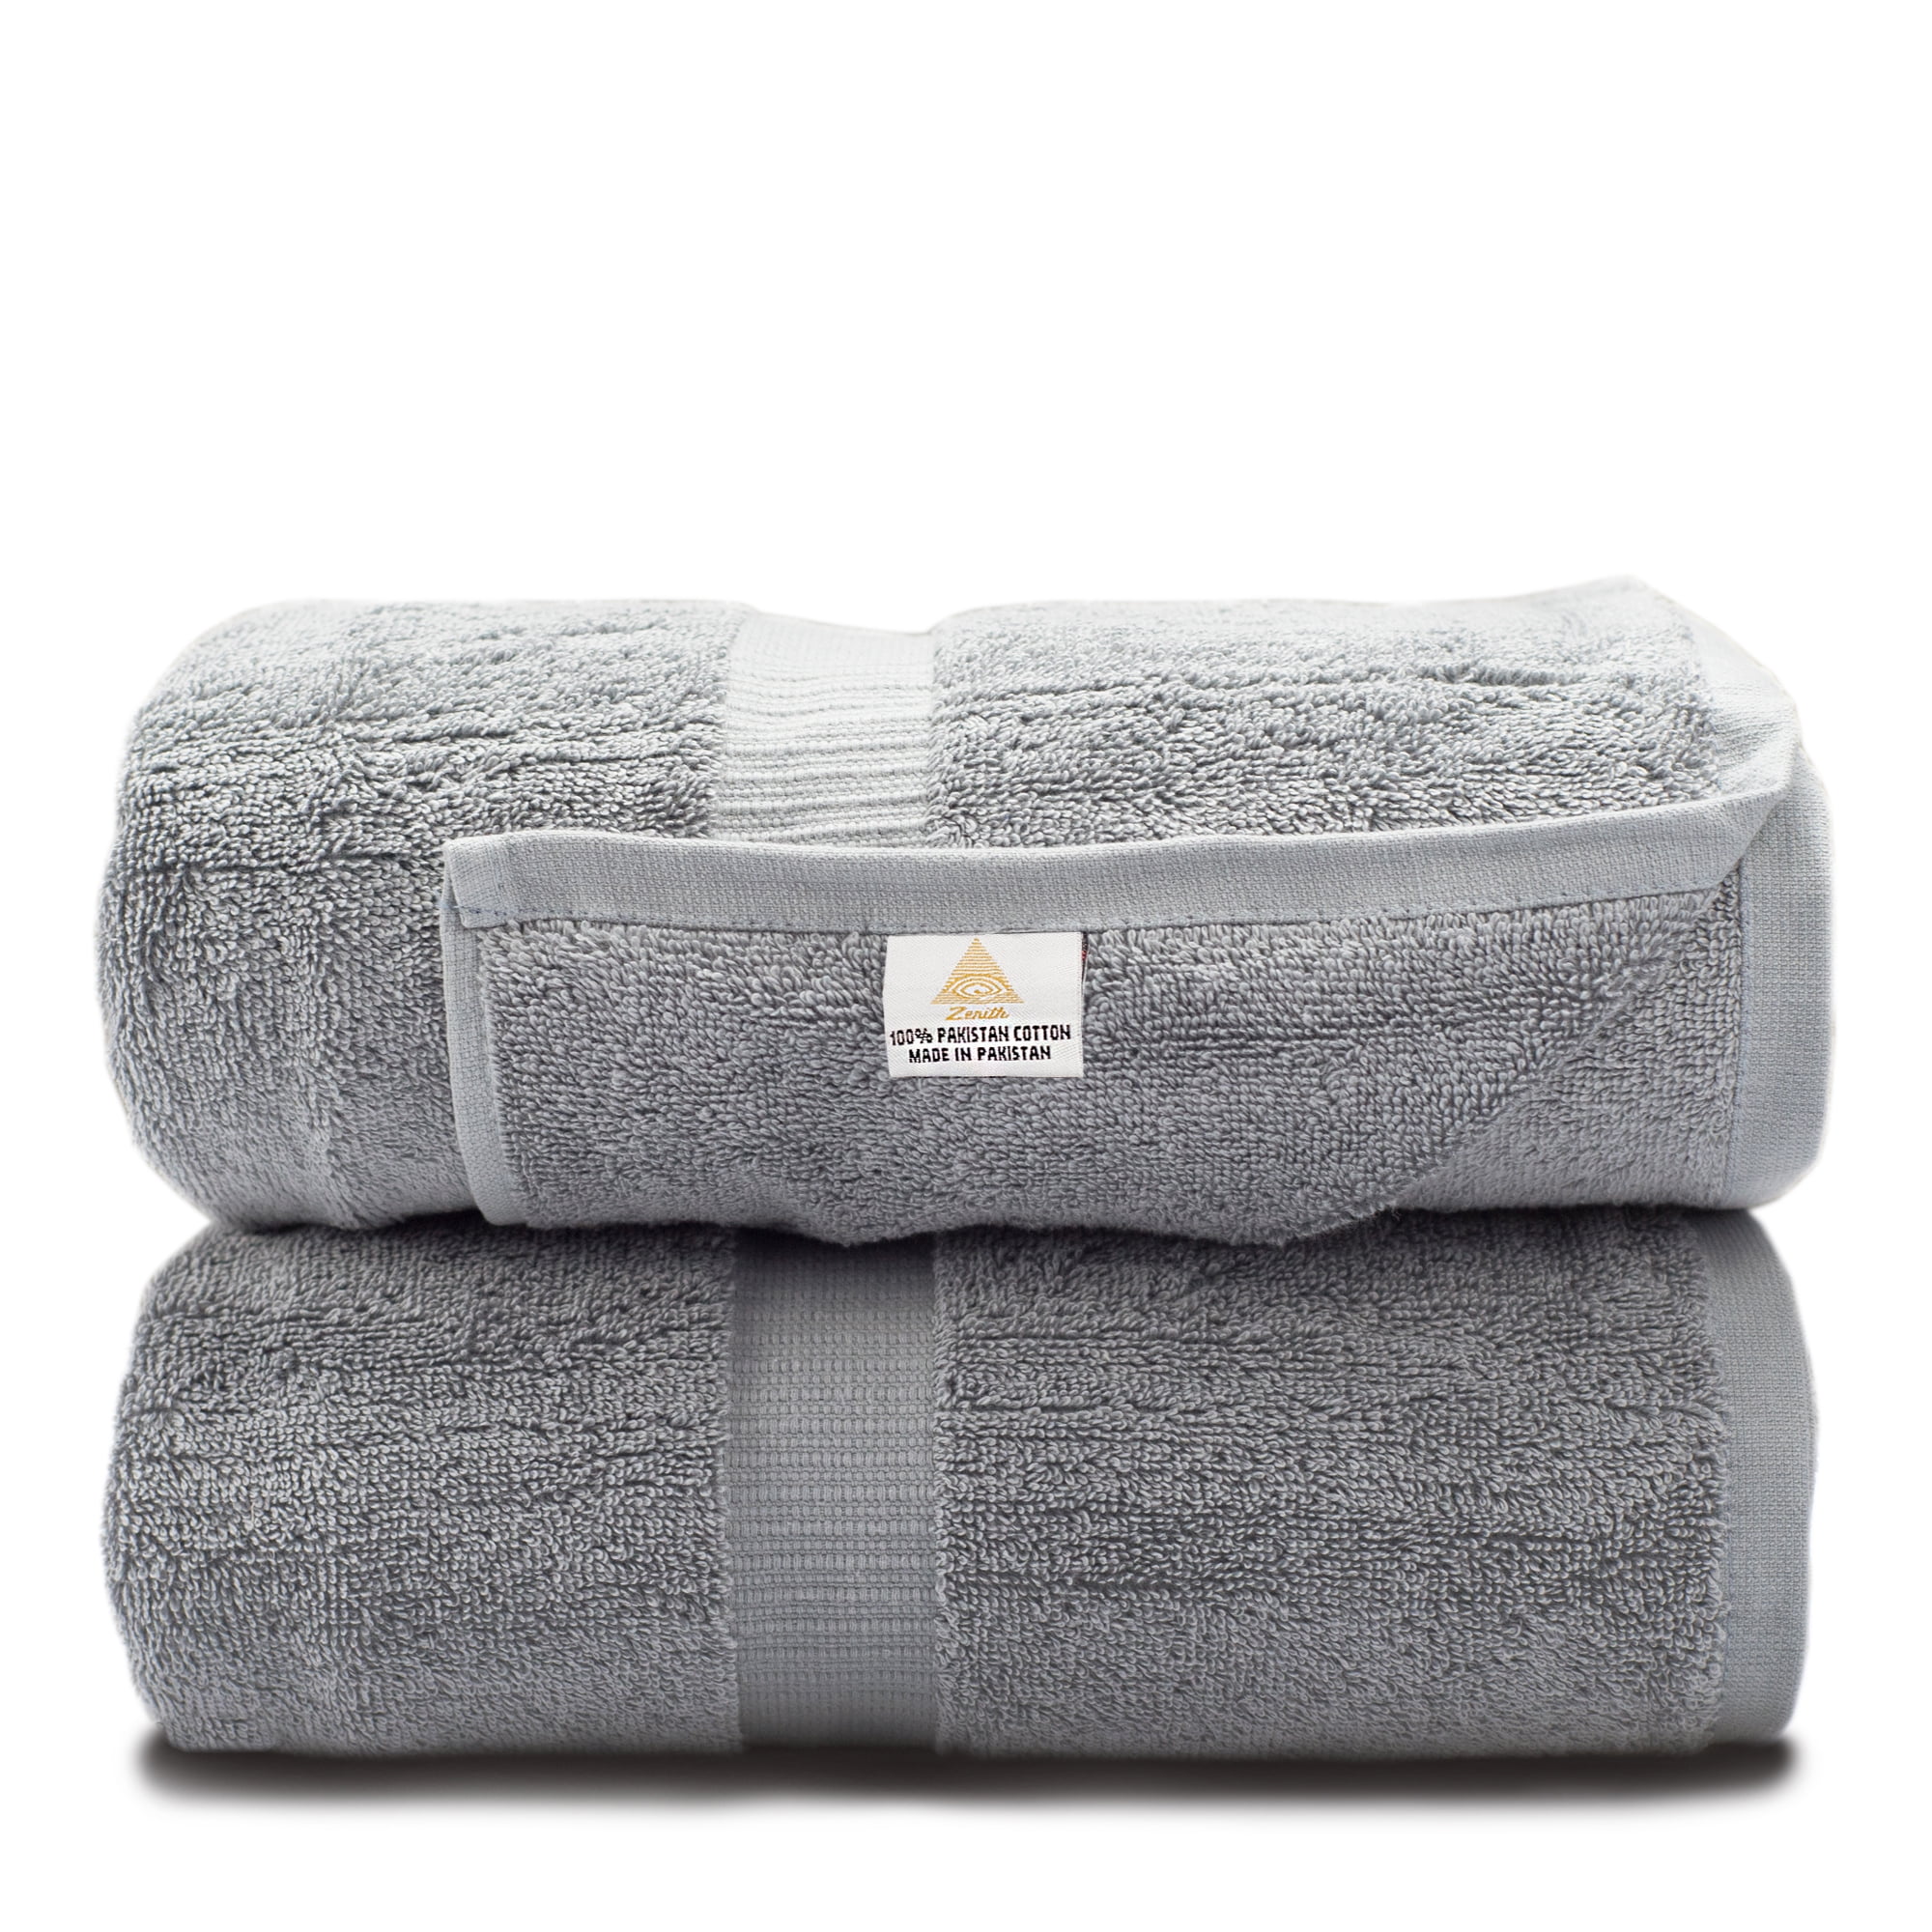 volume discount available priced 3 to pack NEW Dundee Bath Towels 27" x 54" 